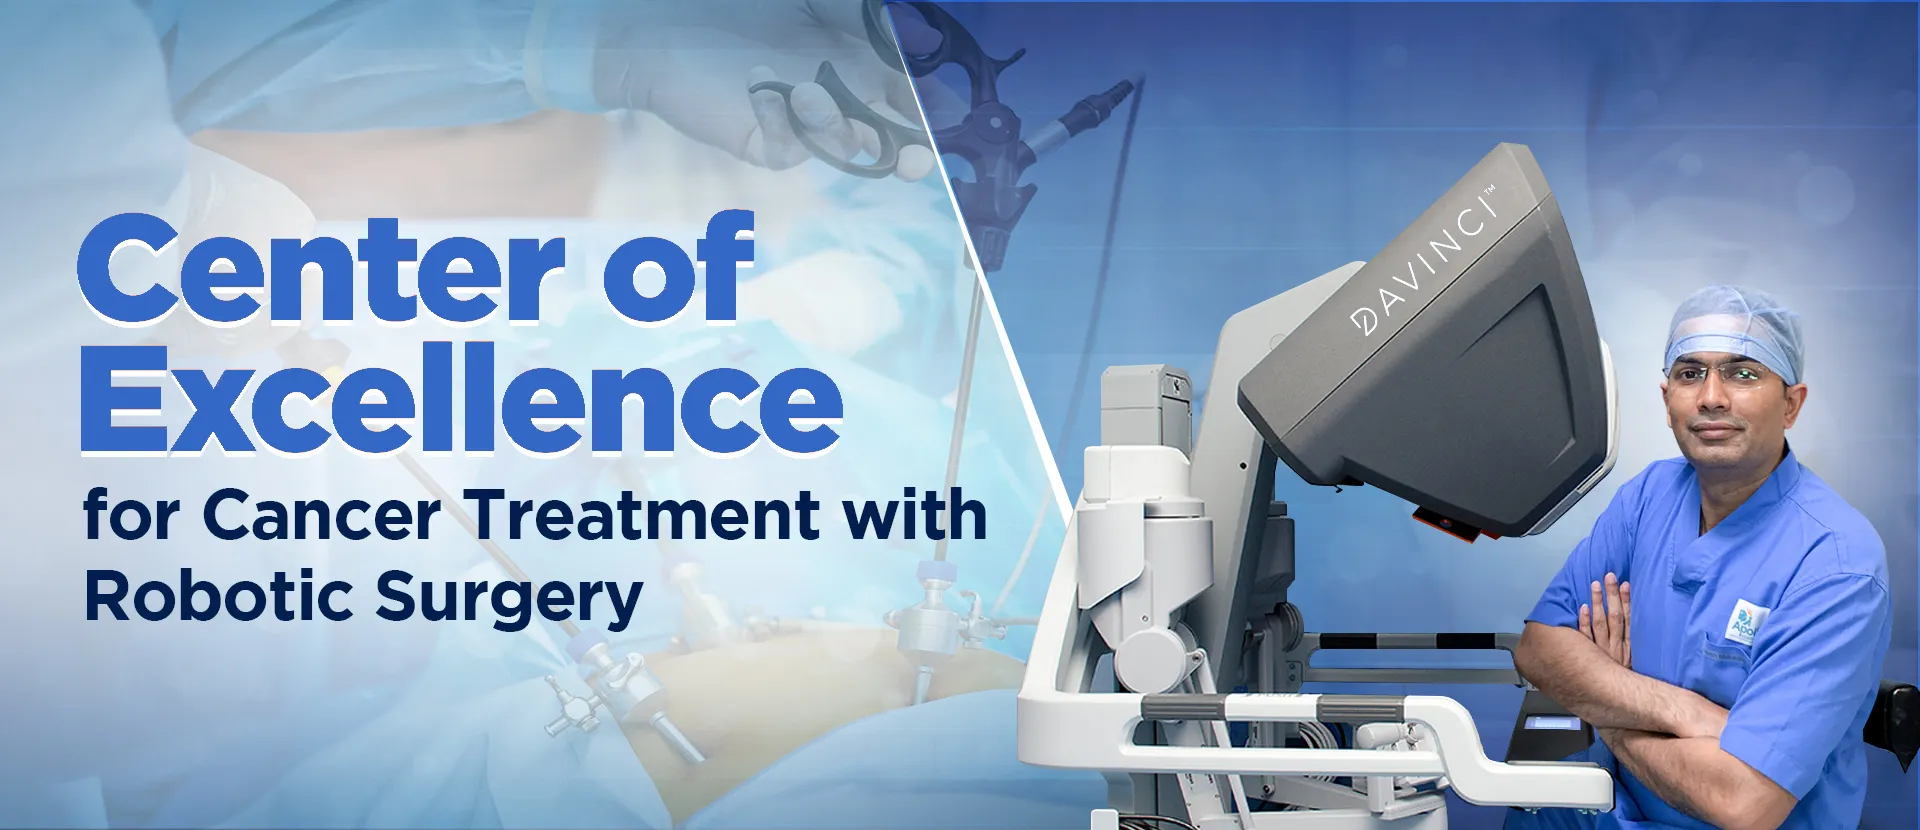 Cancer Treatment with Robotic Surgery in Ahmedabad, Gujarat